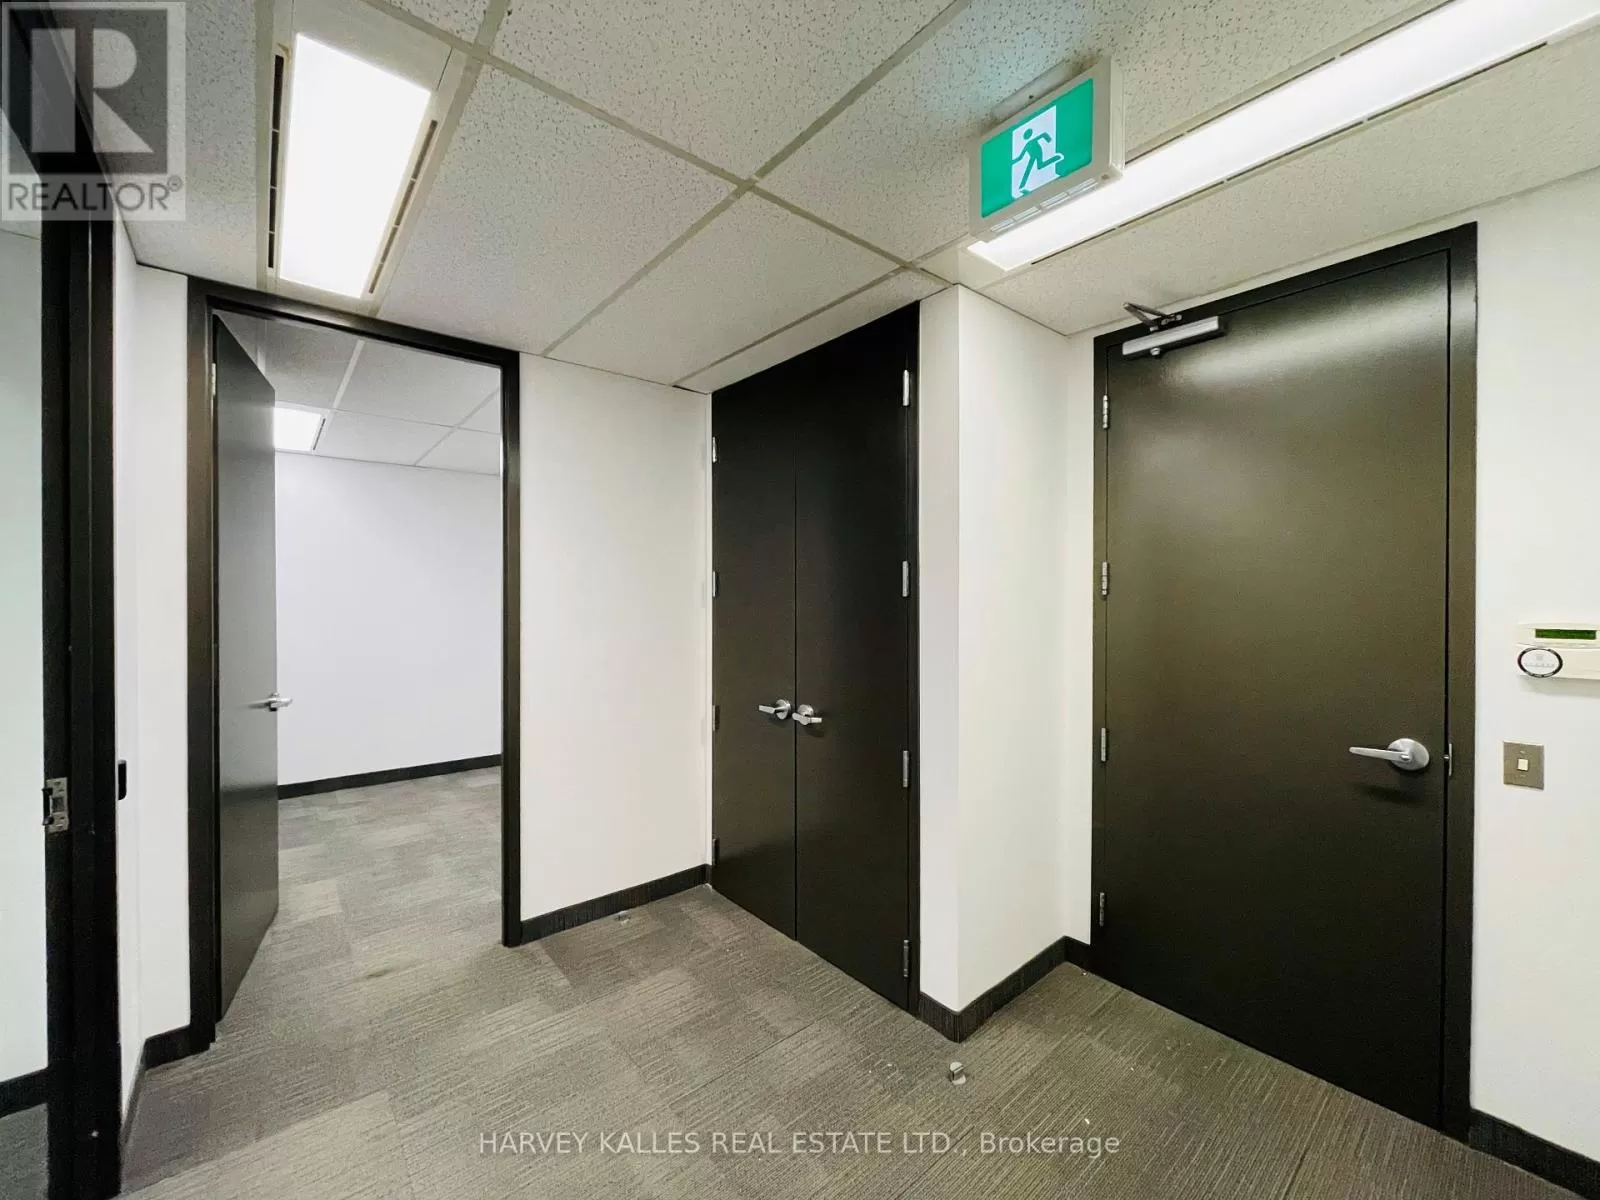 Offices for rent: 512 - 45 Sheppard Avenue E, Toronto, Ontario M2N 5W9